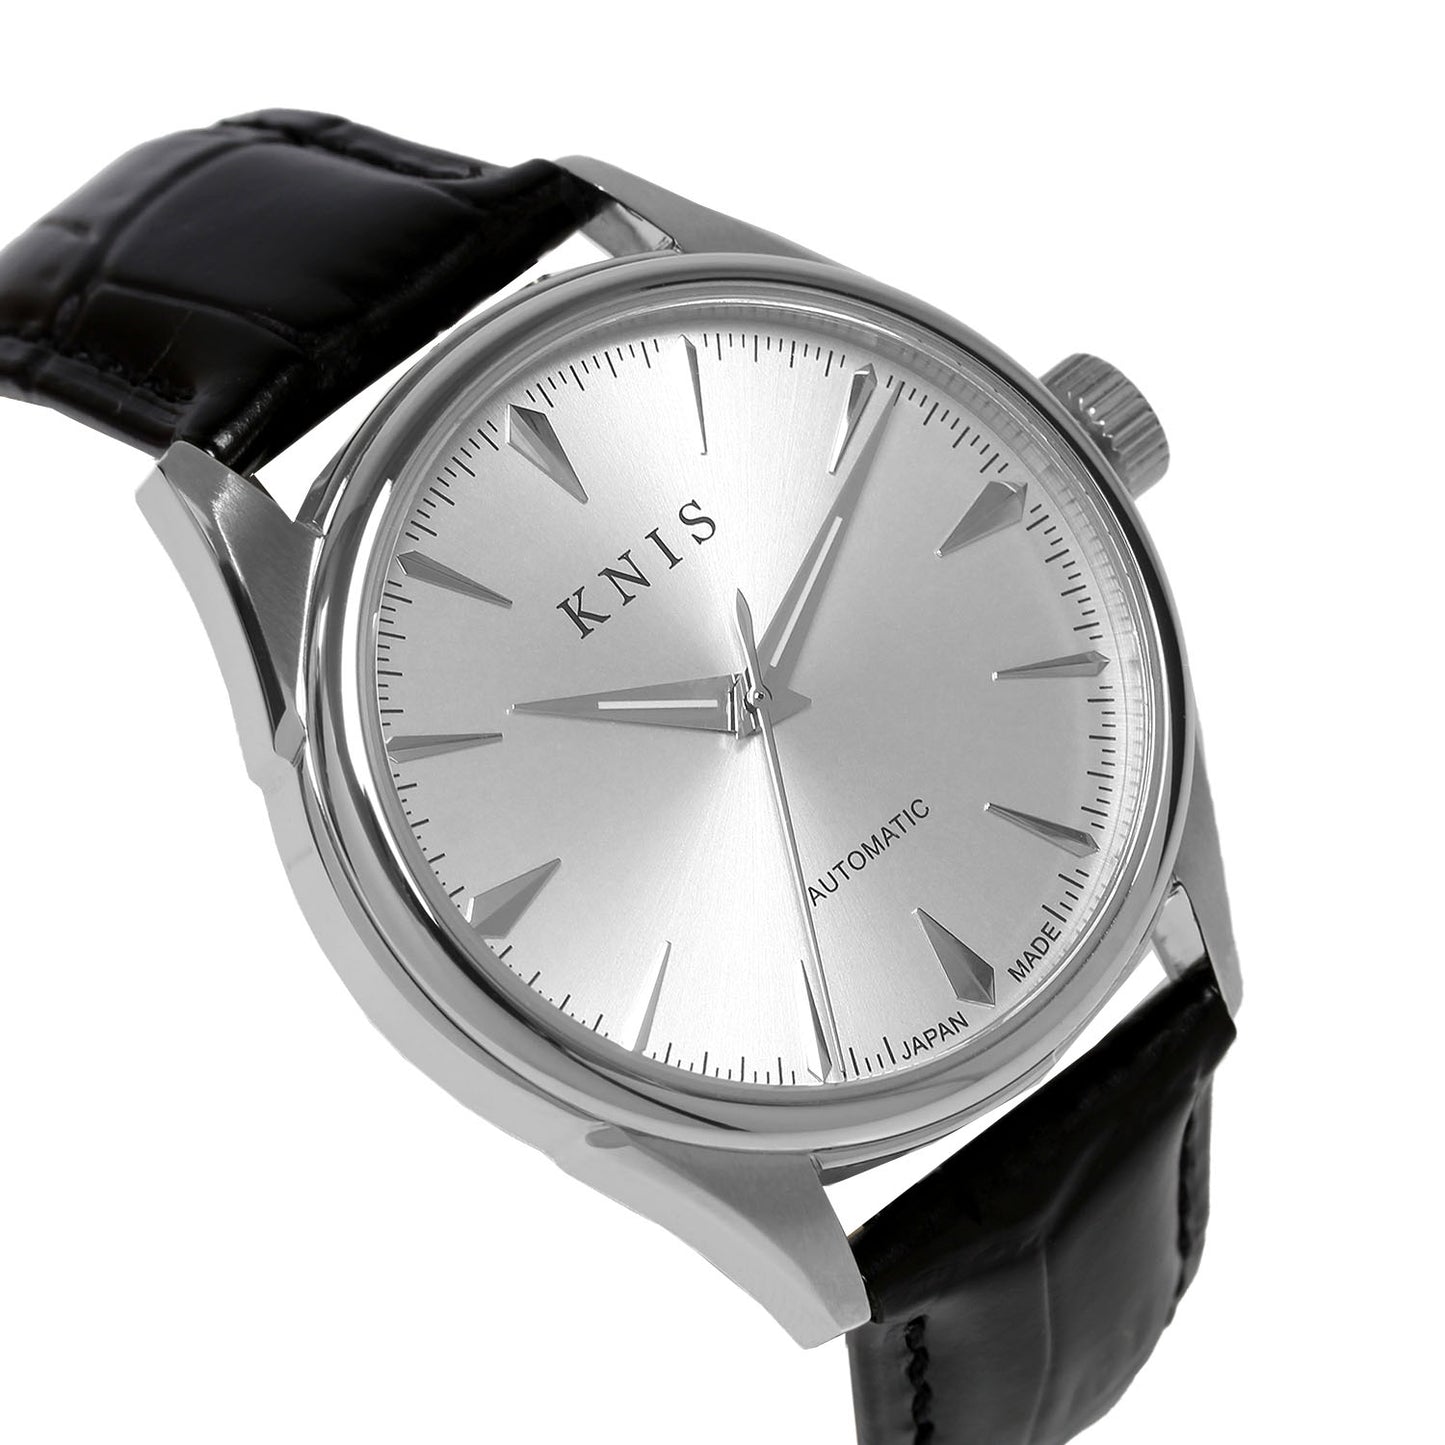 KNIS Automatic Sunray Dial White Silver Black Leather KN001-WHBKLE 